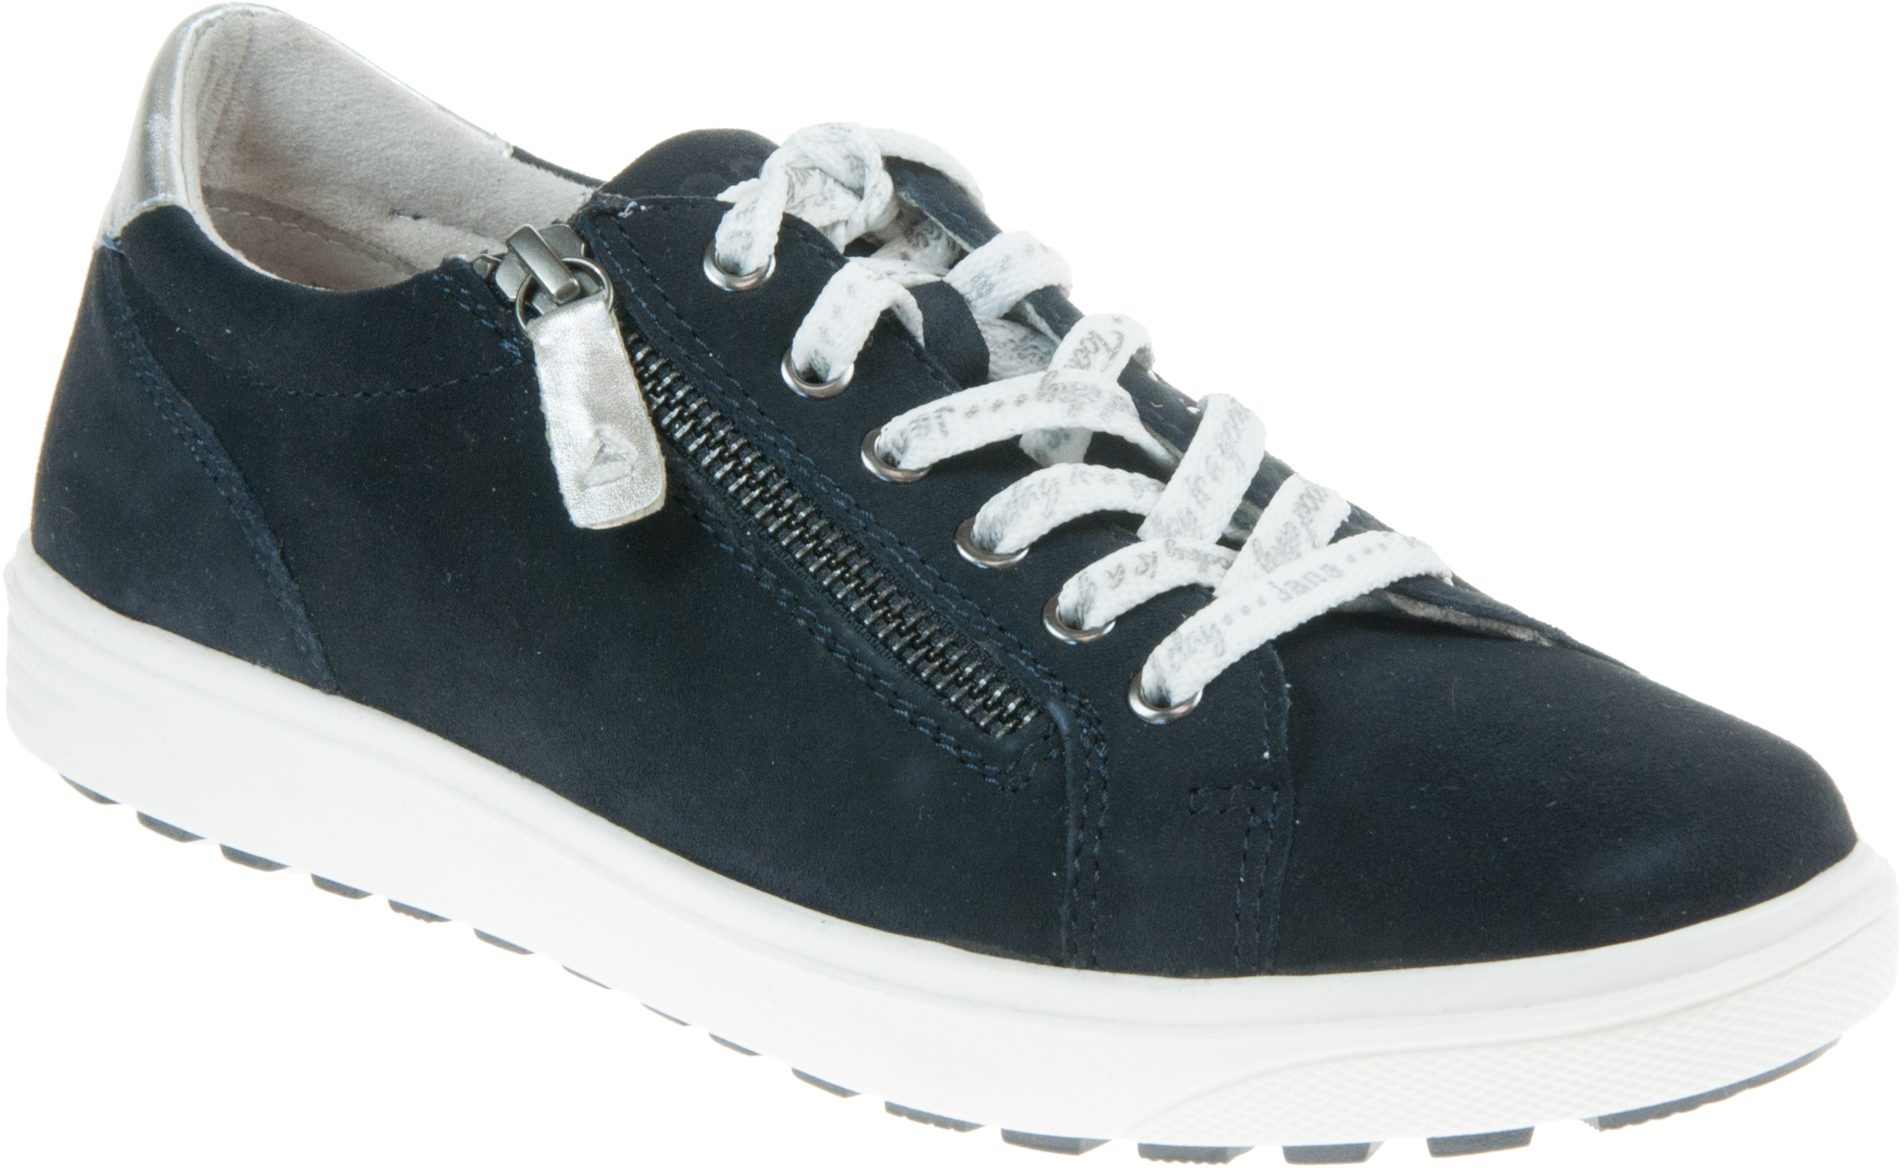 Jana 23611-28 Navy 23611-28 805 - Everyday Shoes - Humphries Shoes